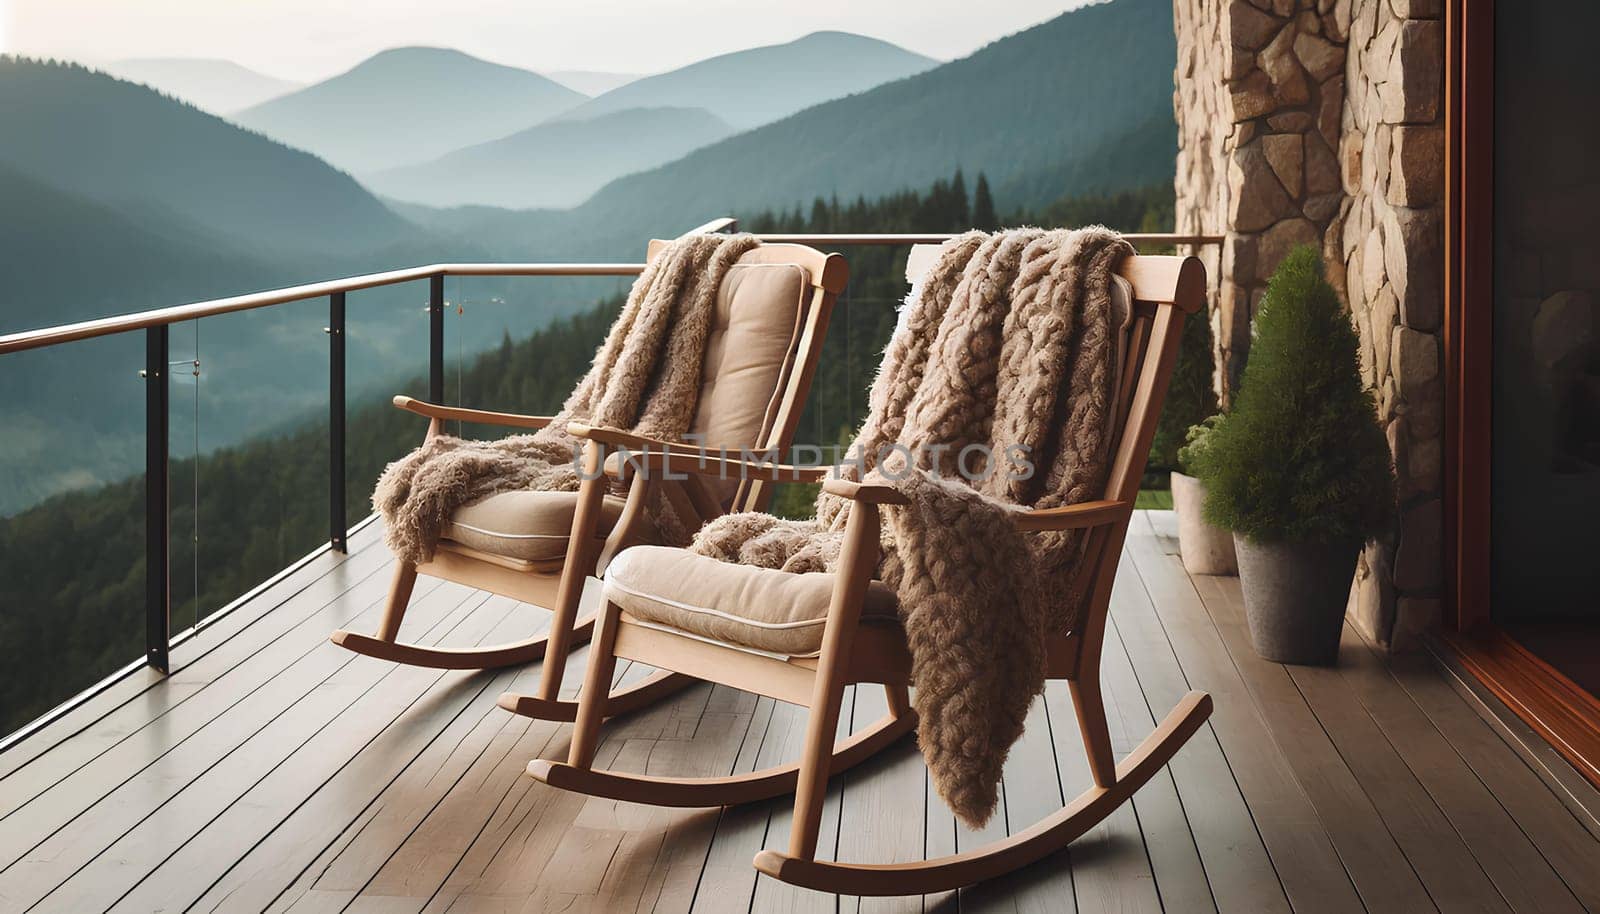 two rocking chairs with warm blankets on an open terrace overlooking the mountains.